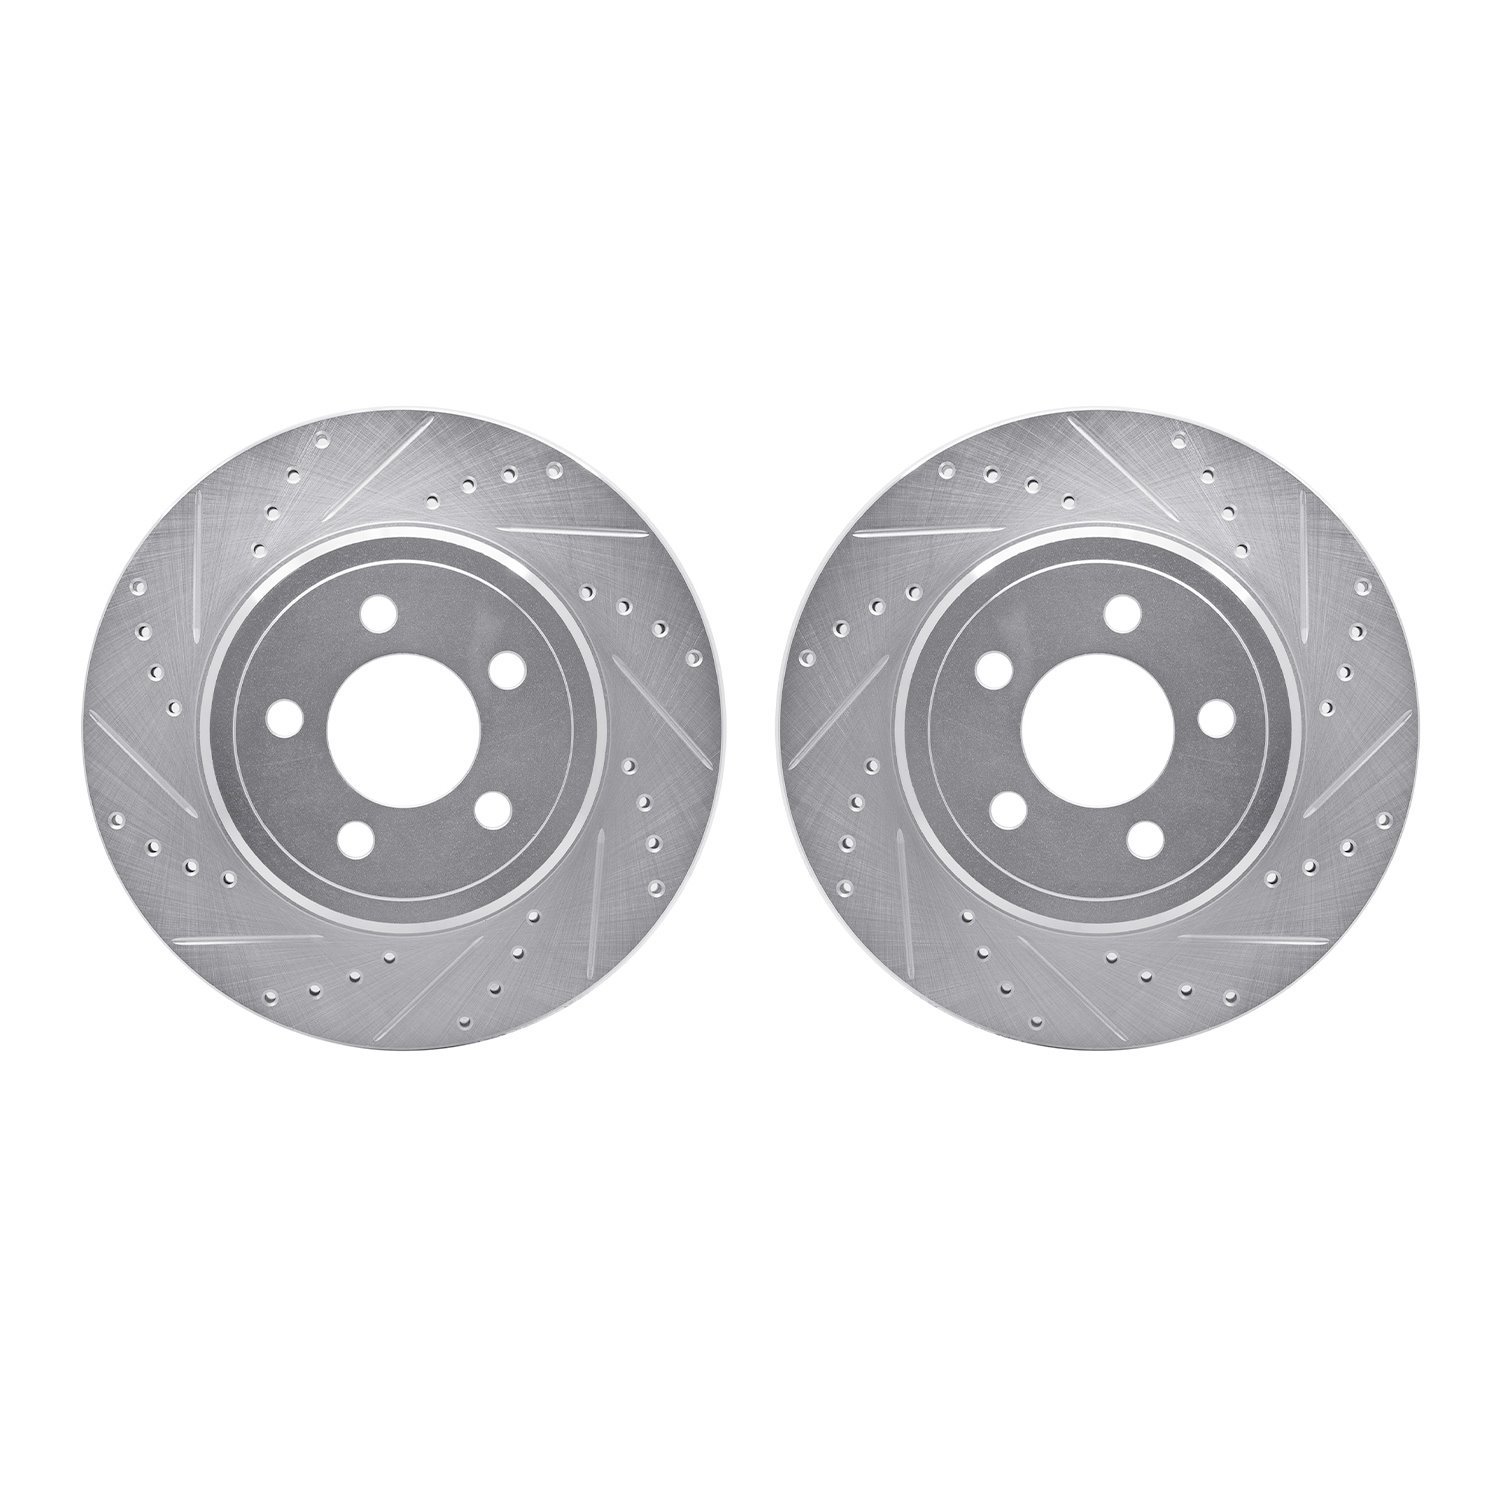 7002-39020 Drilled/Slotted Brake Rotors [Silver], Fits Select Mopar, Position: Rear